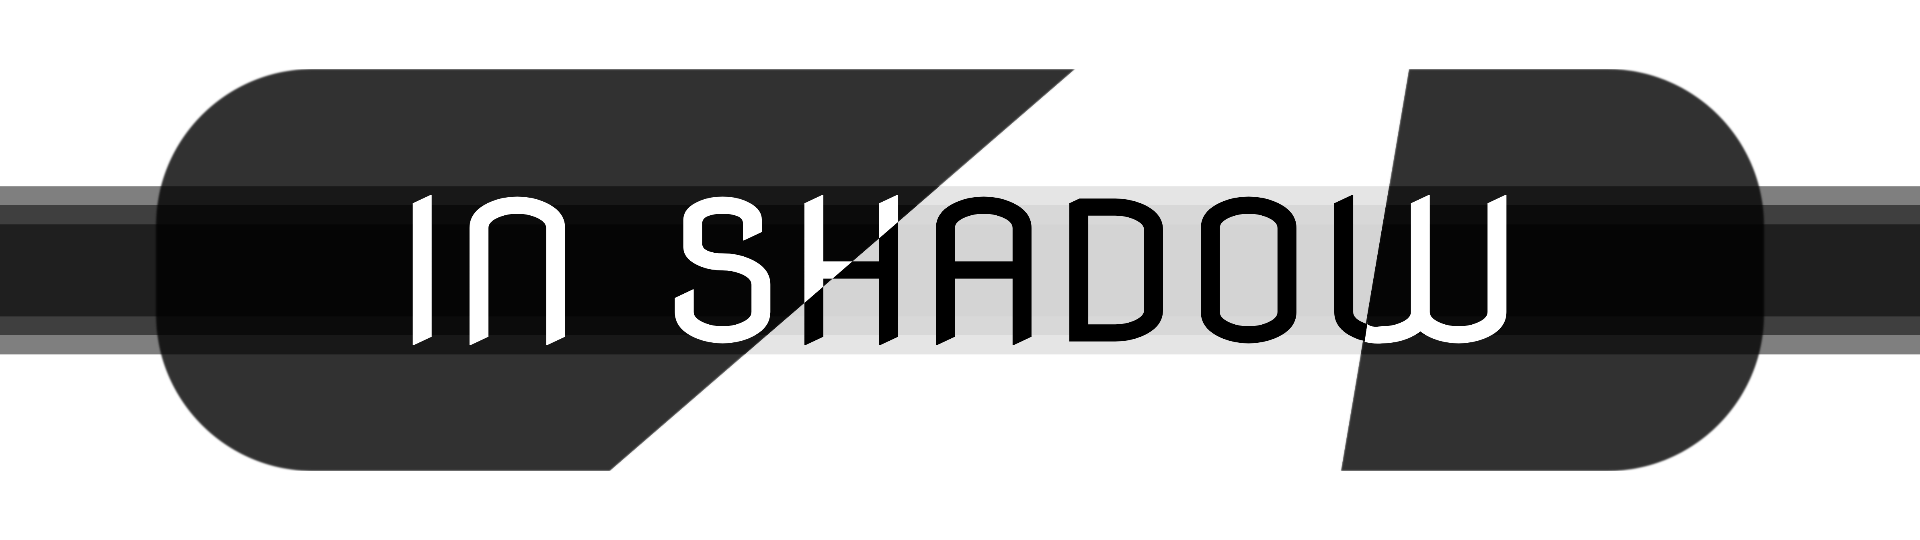 In Shadow